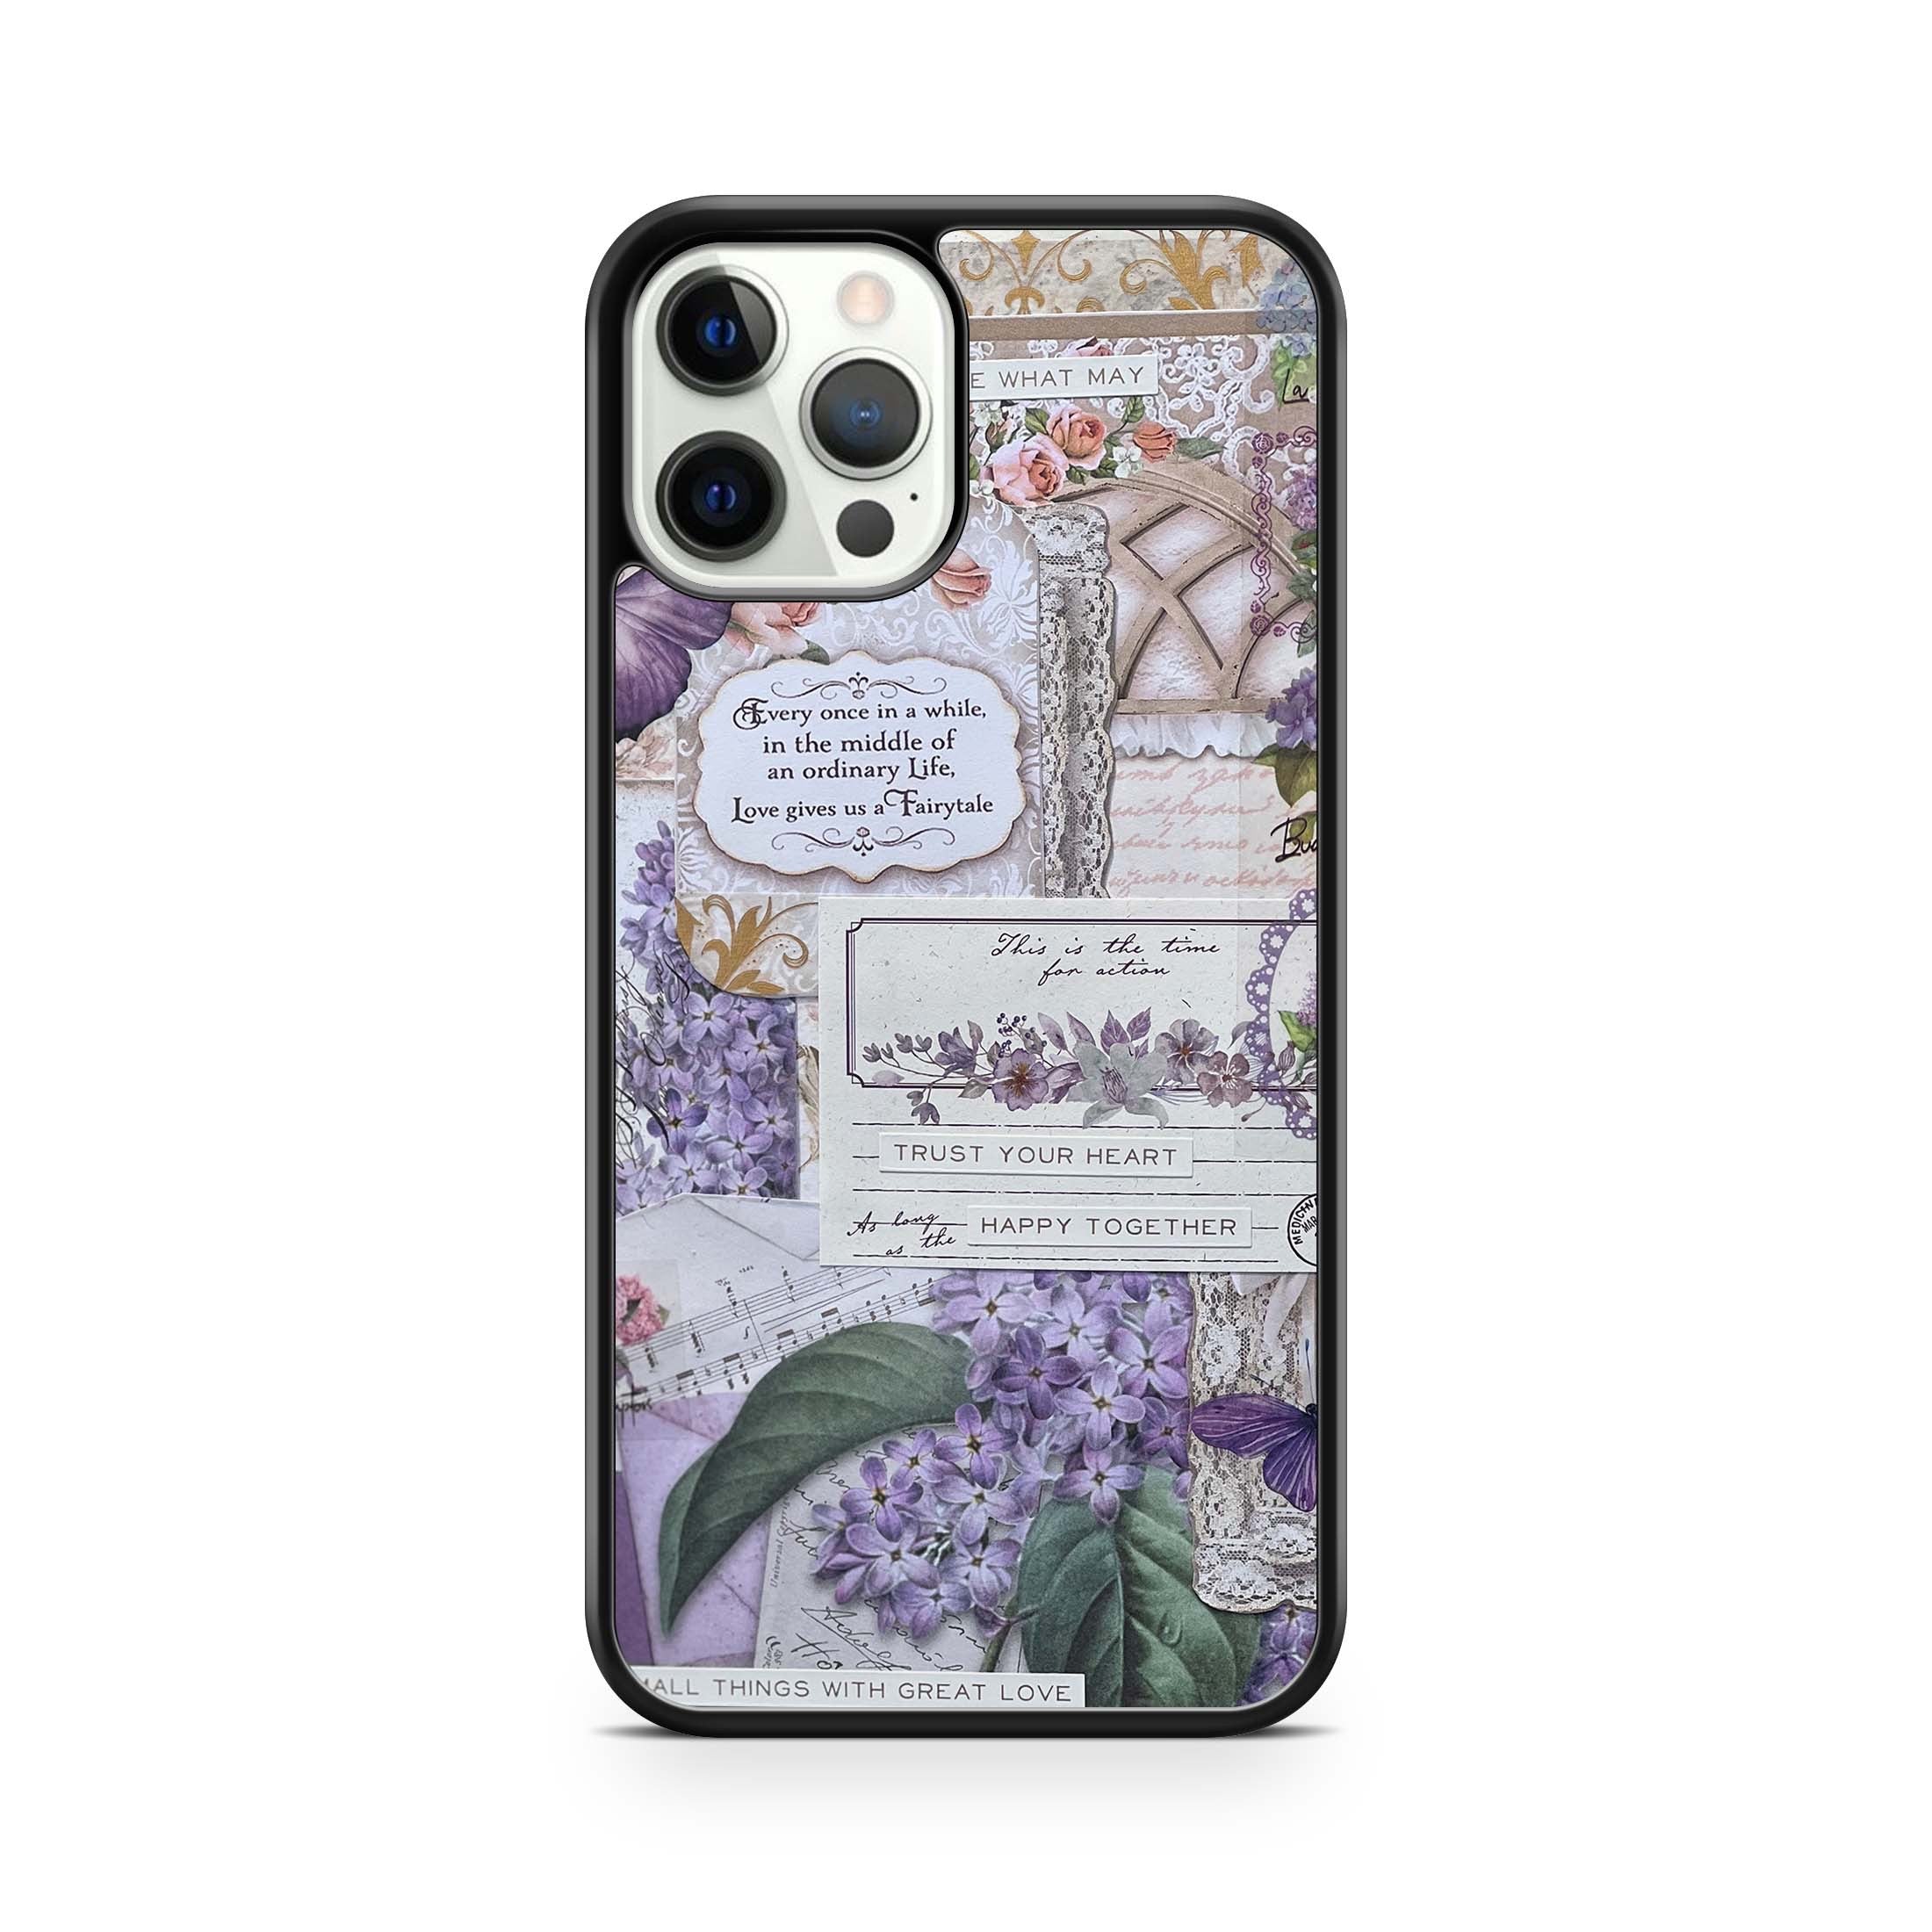 Scrapbook design featuring flowers and butterflies in purple phone case